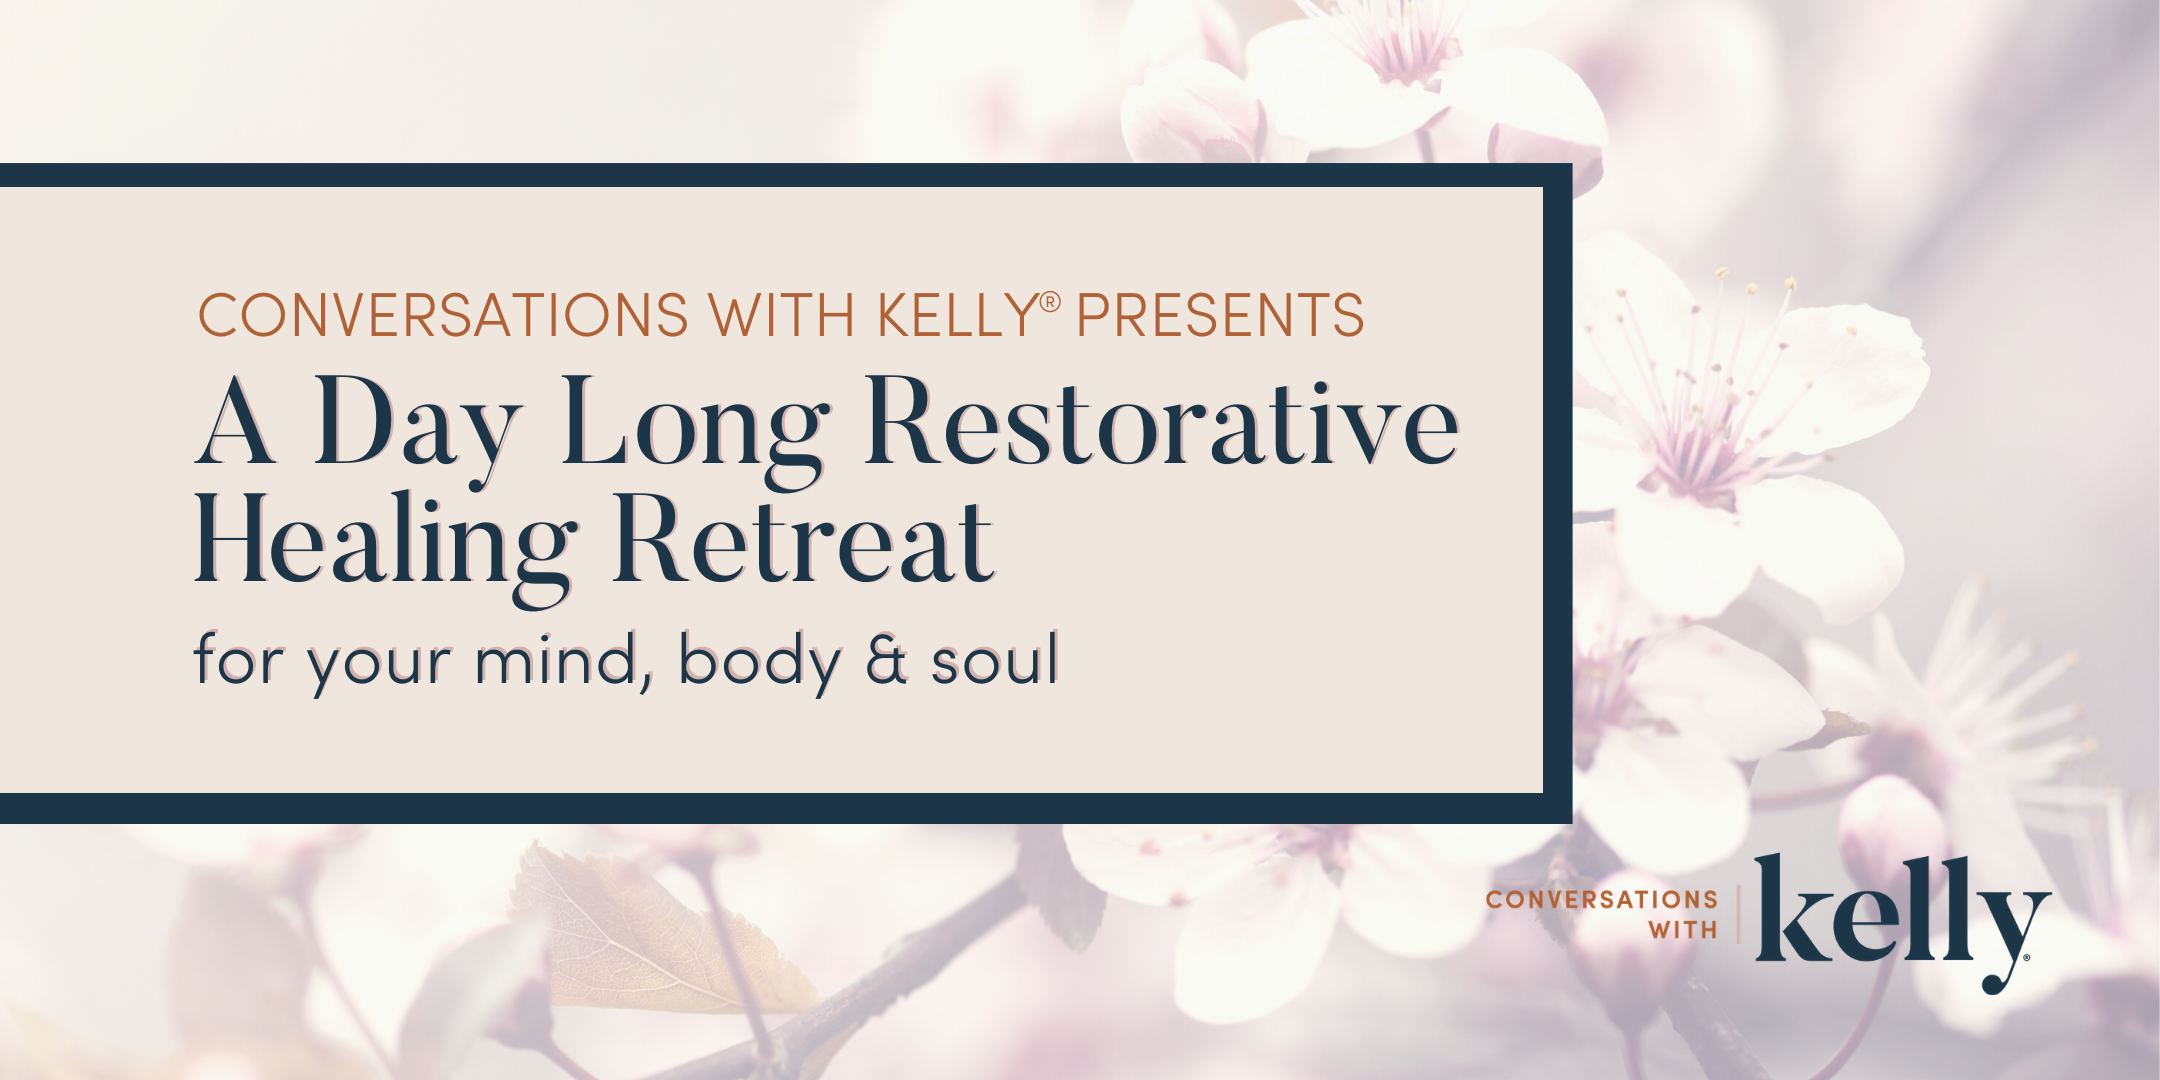 A Day Long Restorative Healing Retreat by Conversations with Kelly